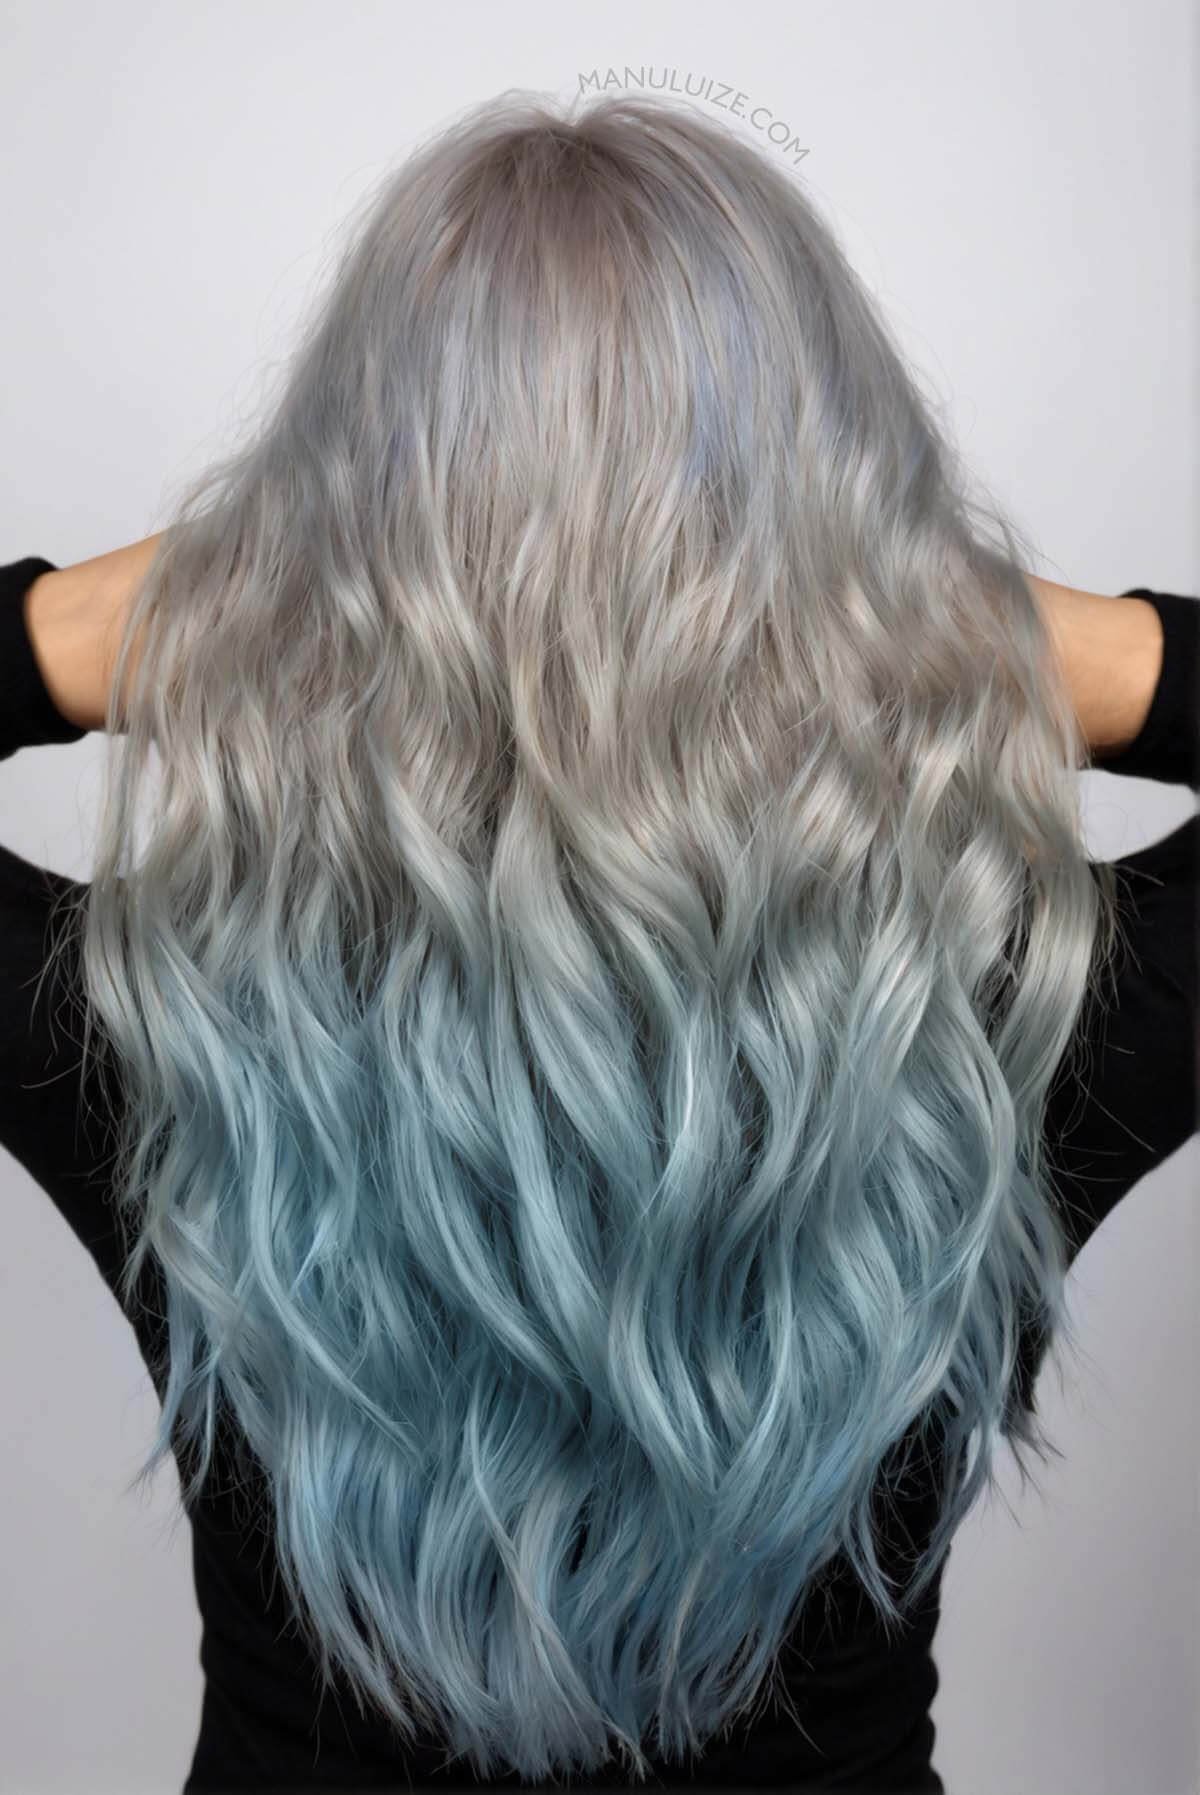 Blonde hair with blue ends